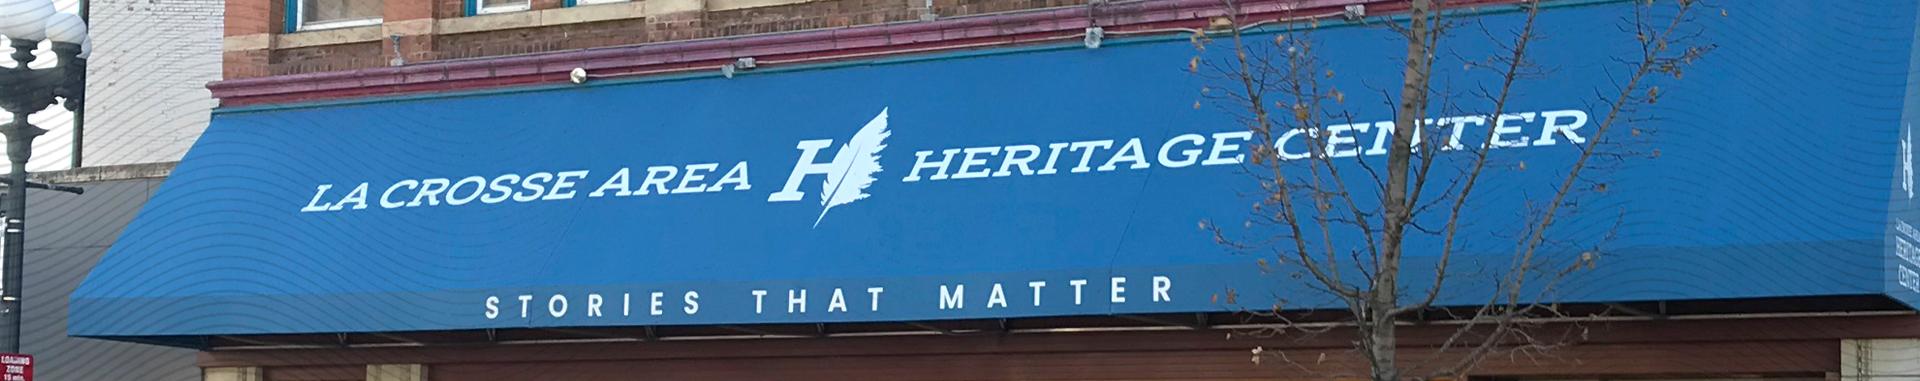 La Crosse Heritage Center building awning with Vendi-created logo and tagline reading stories that matter